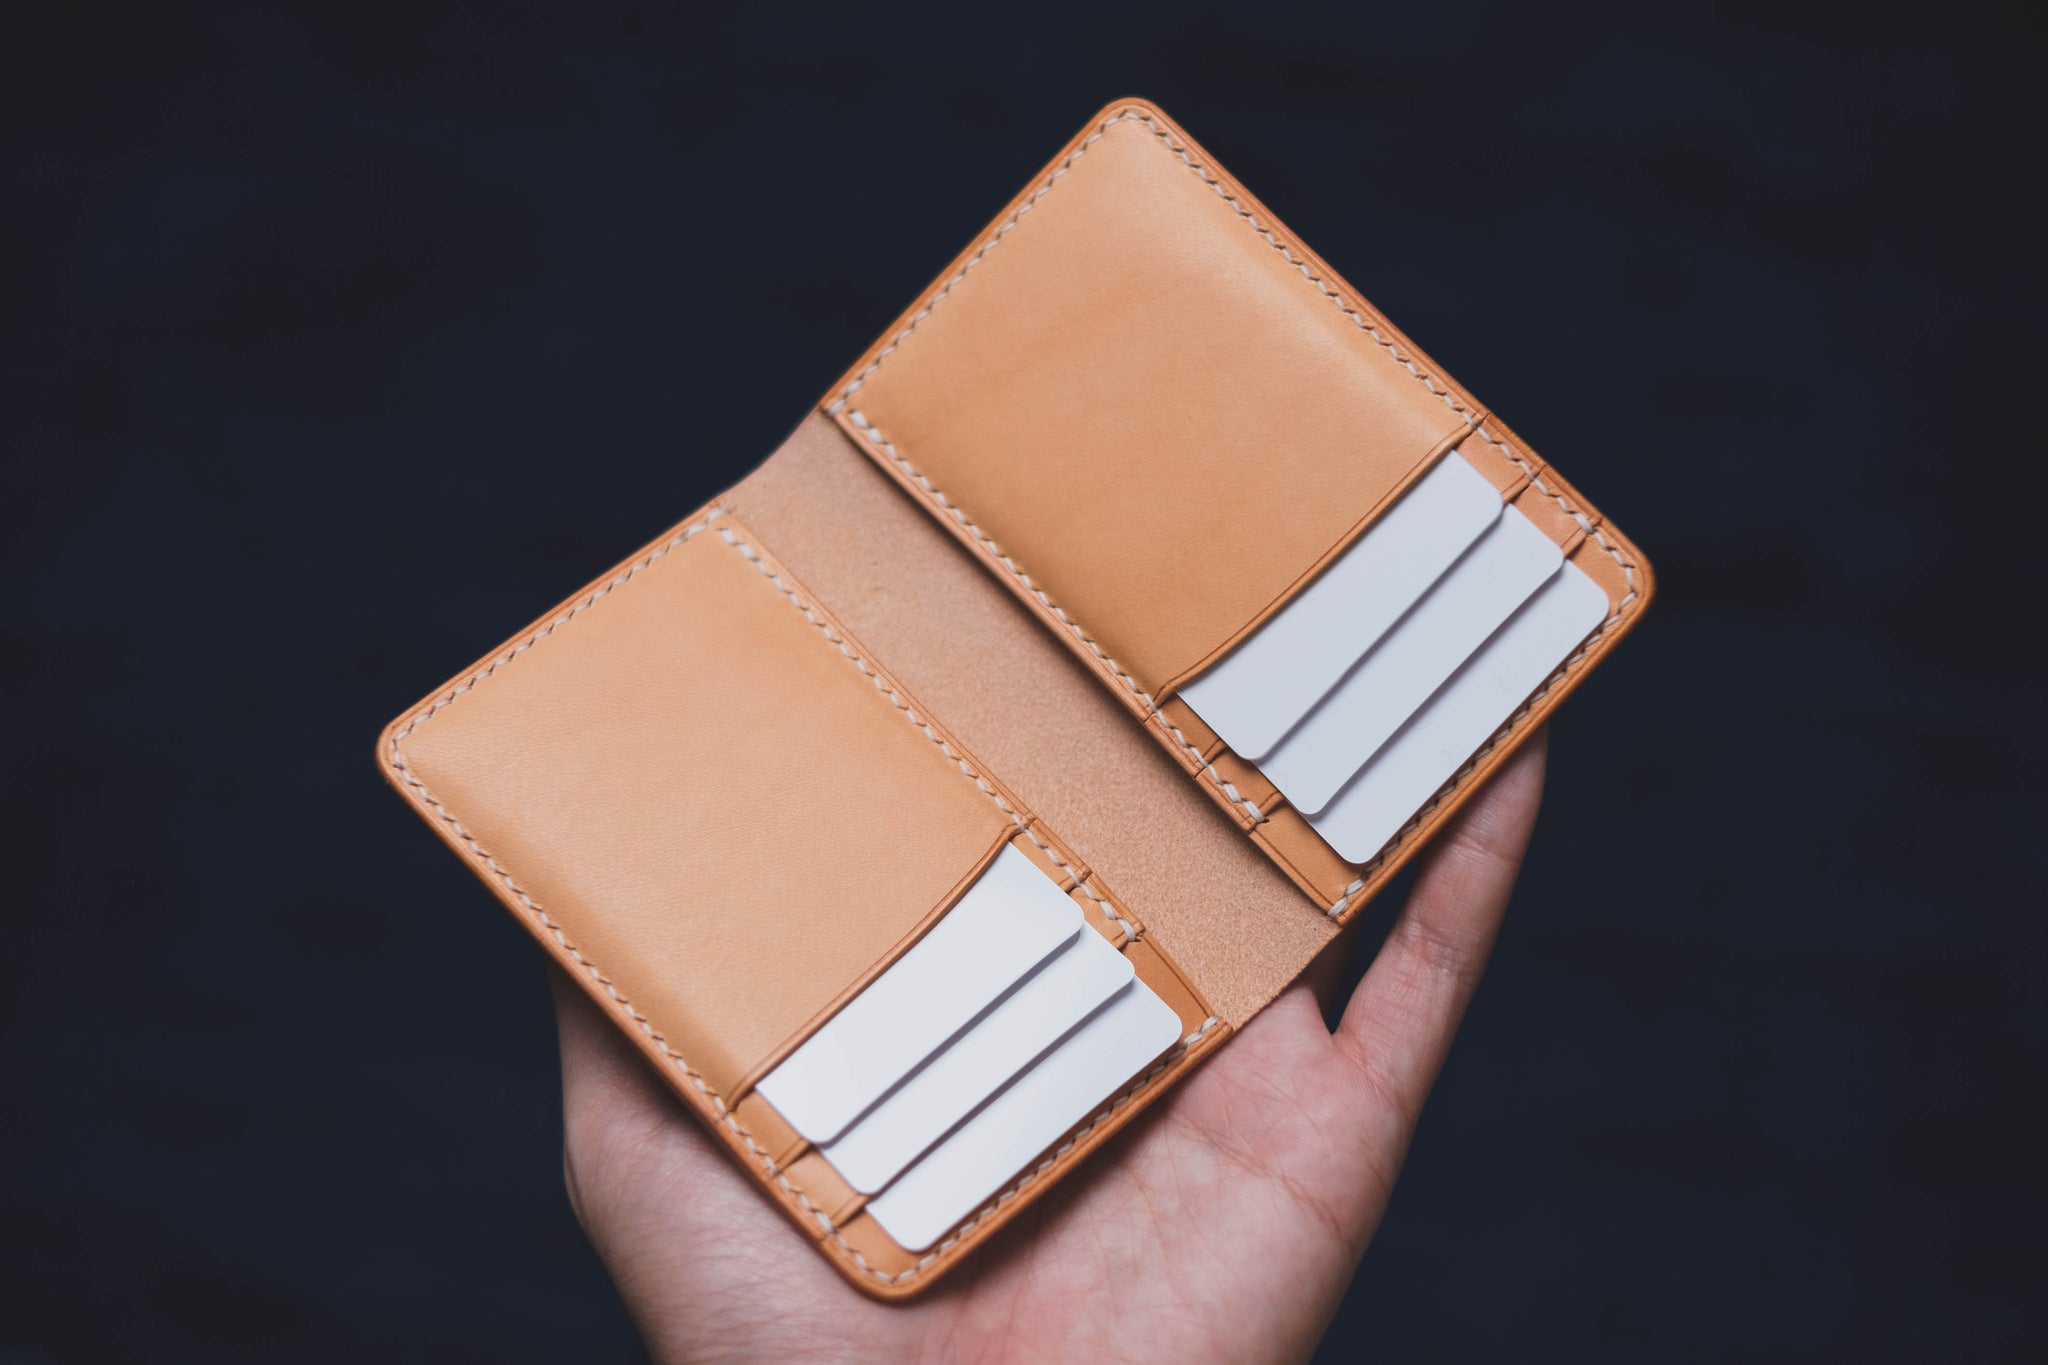 Leather Card Holder - Natural, Brown